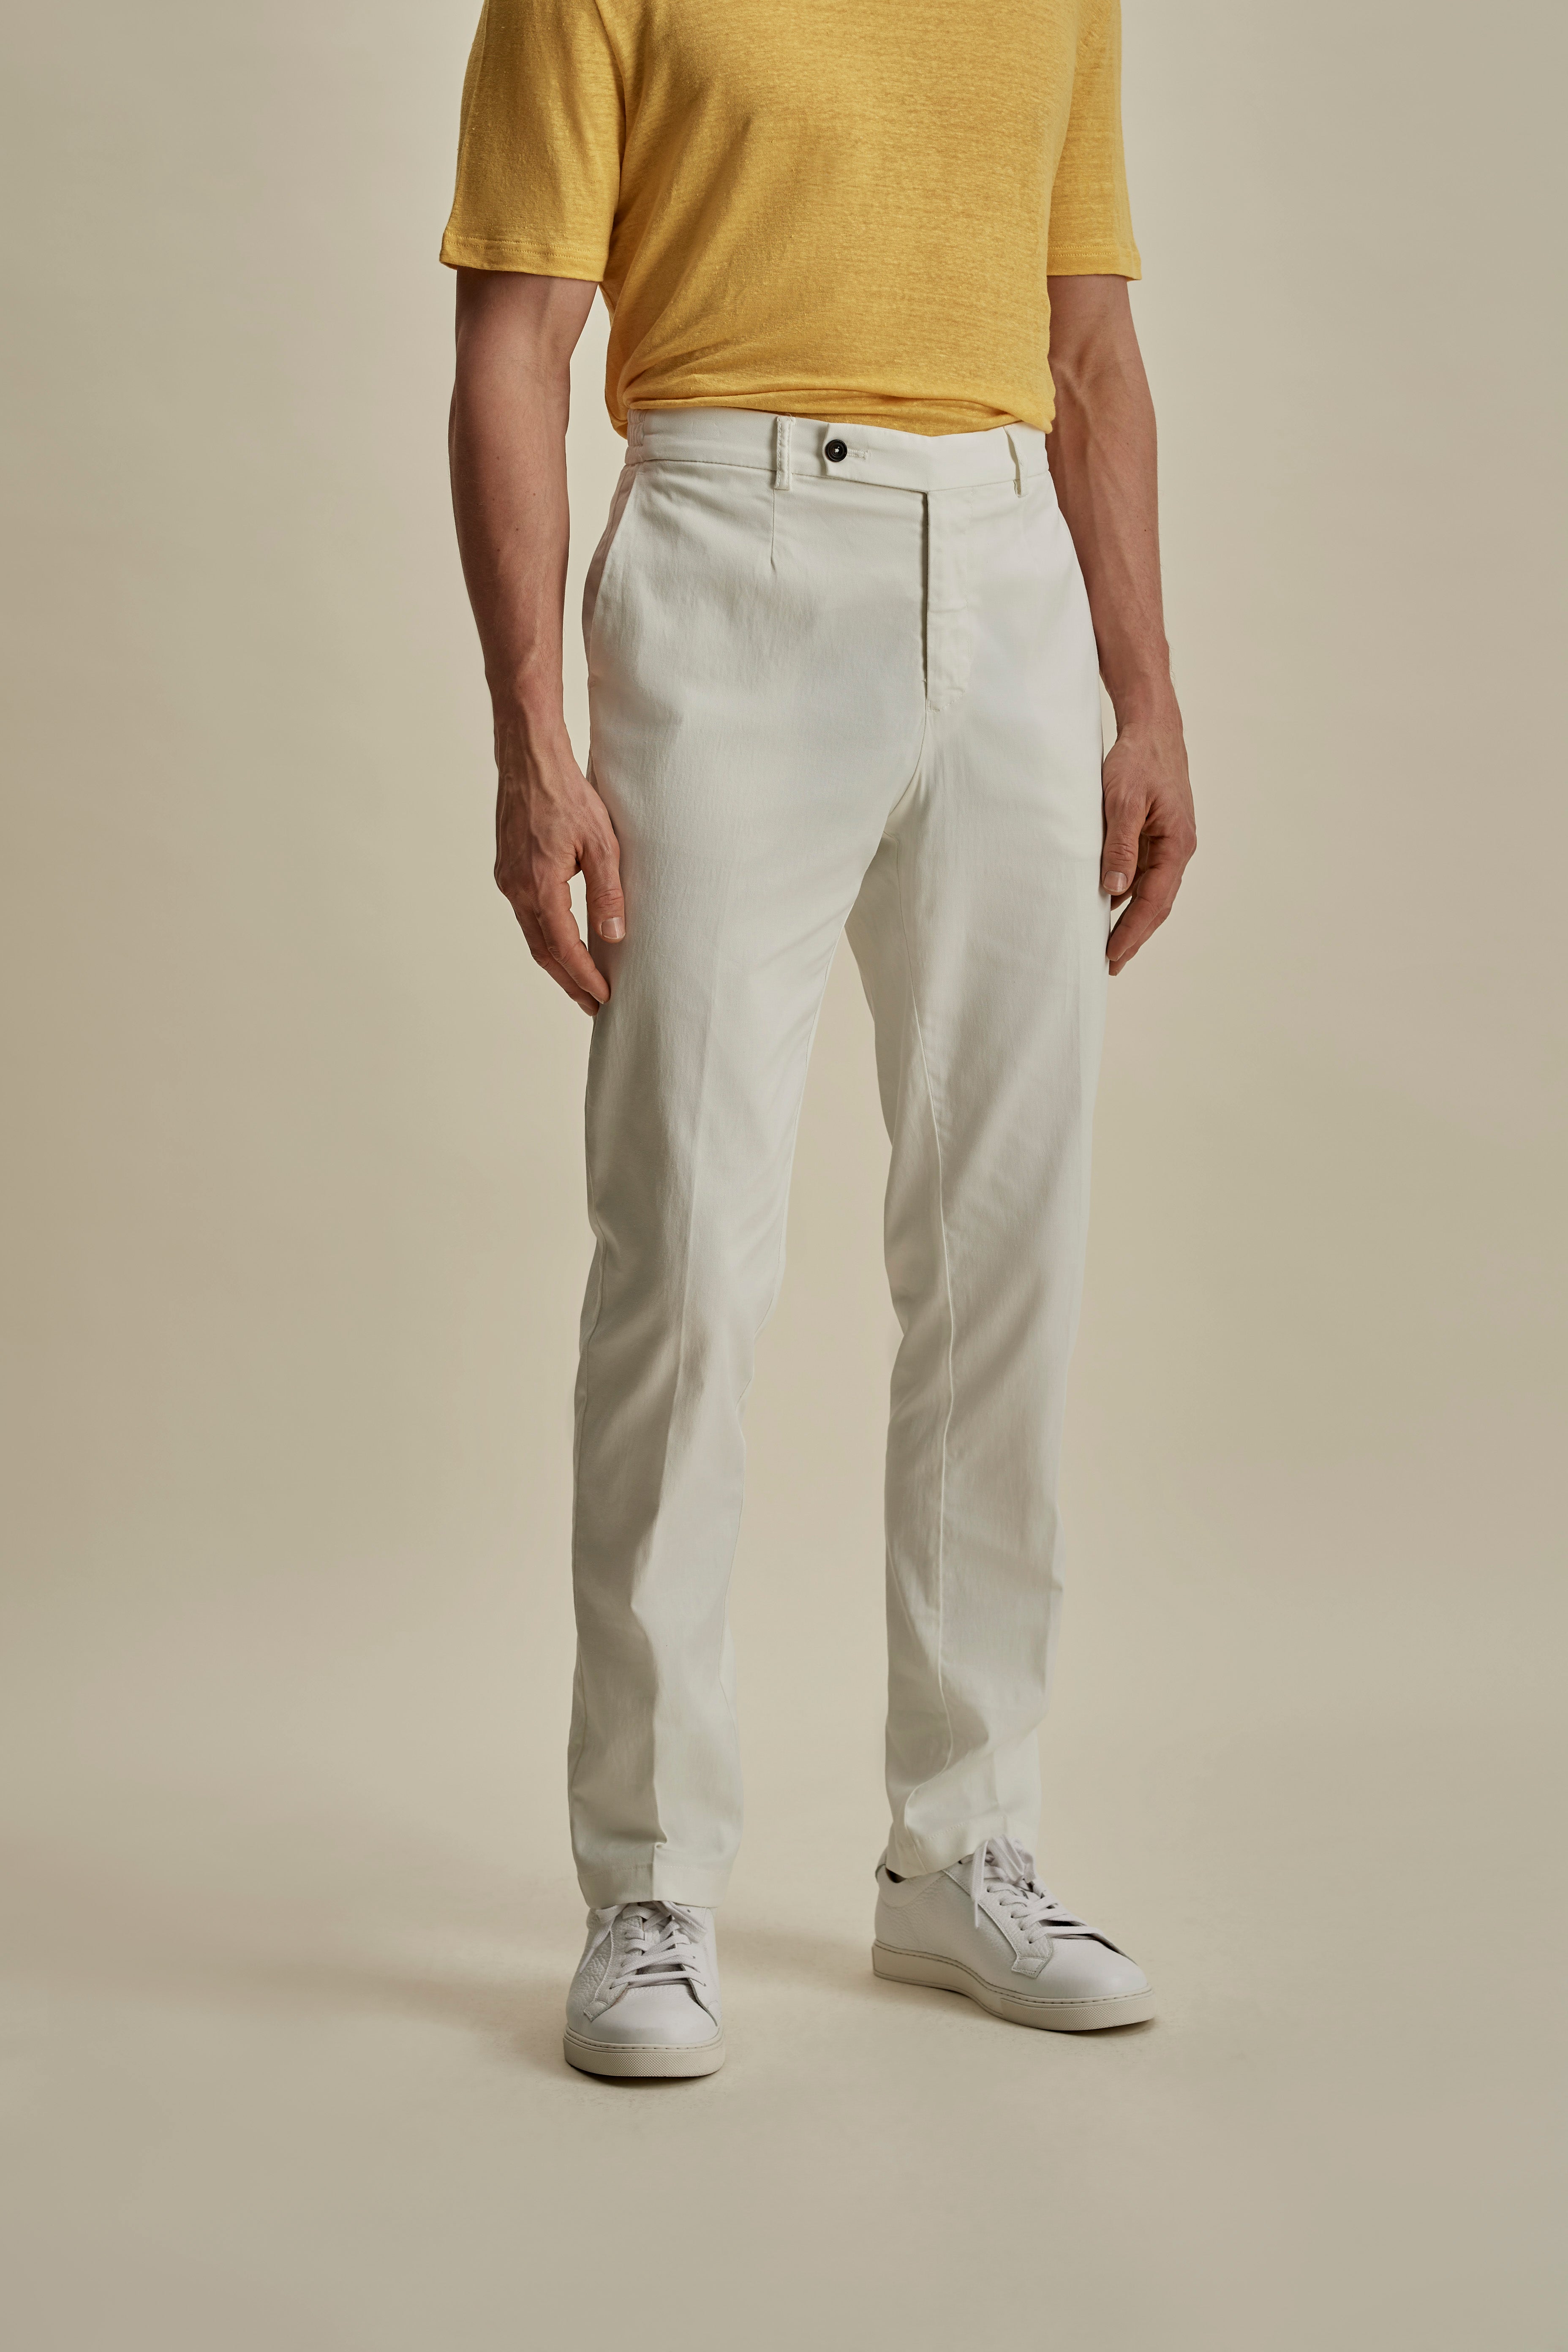 Cotton Easy Fit Flat Front Chinos White Mid Crop Model Image